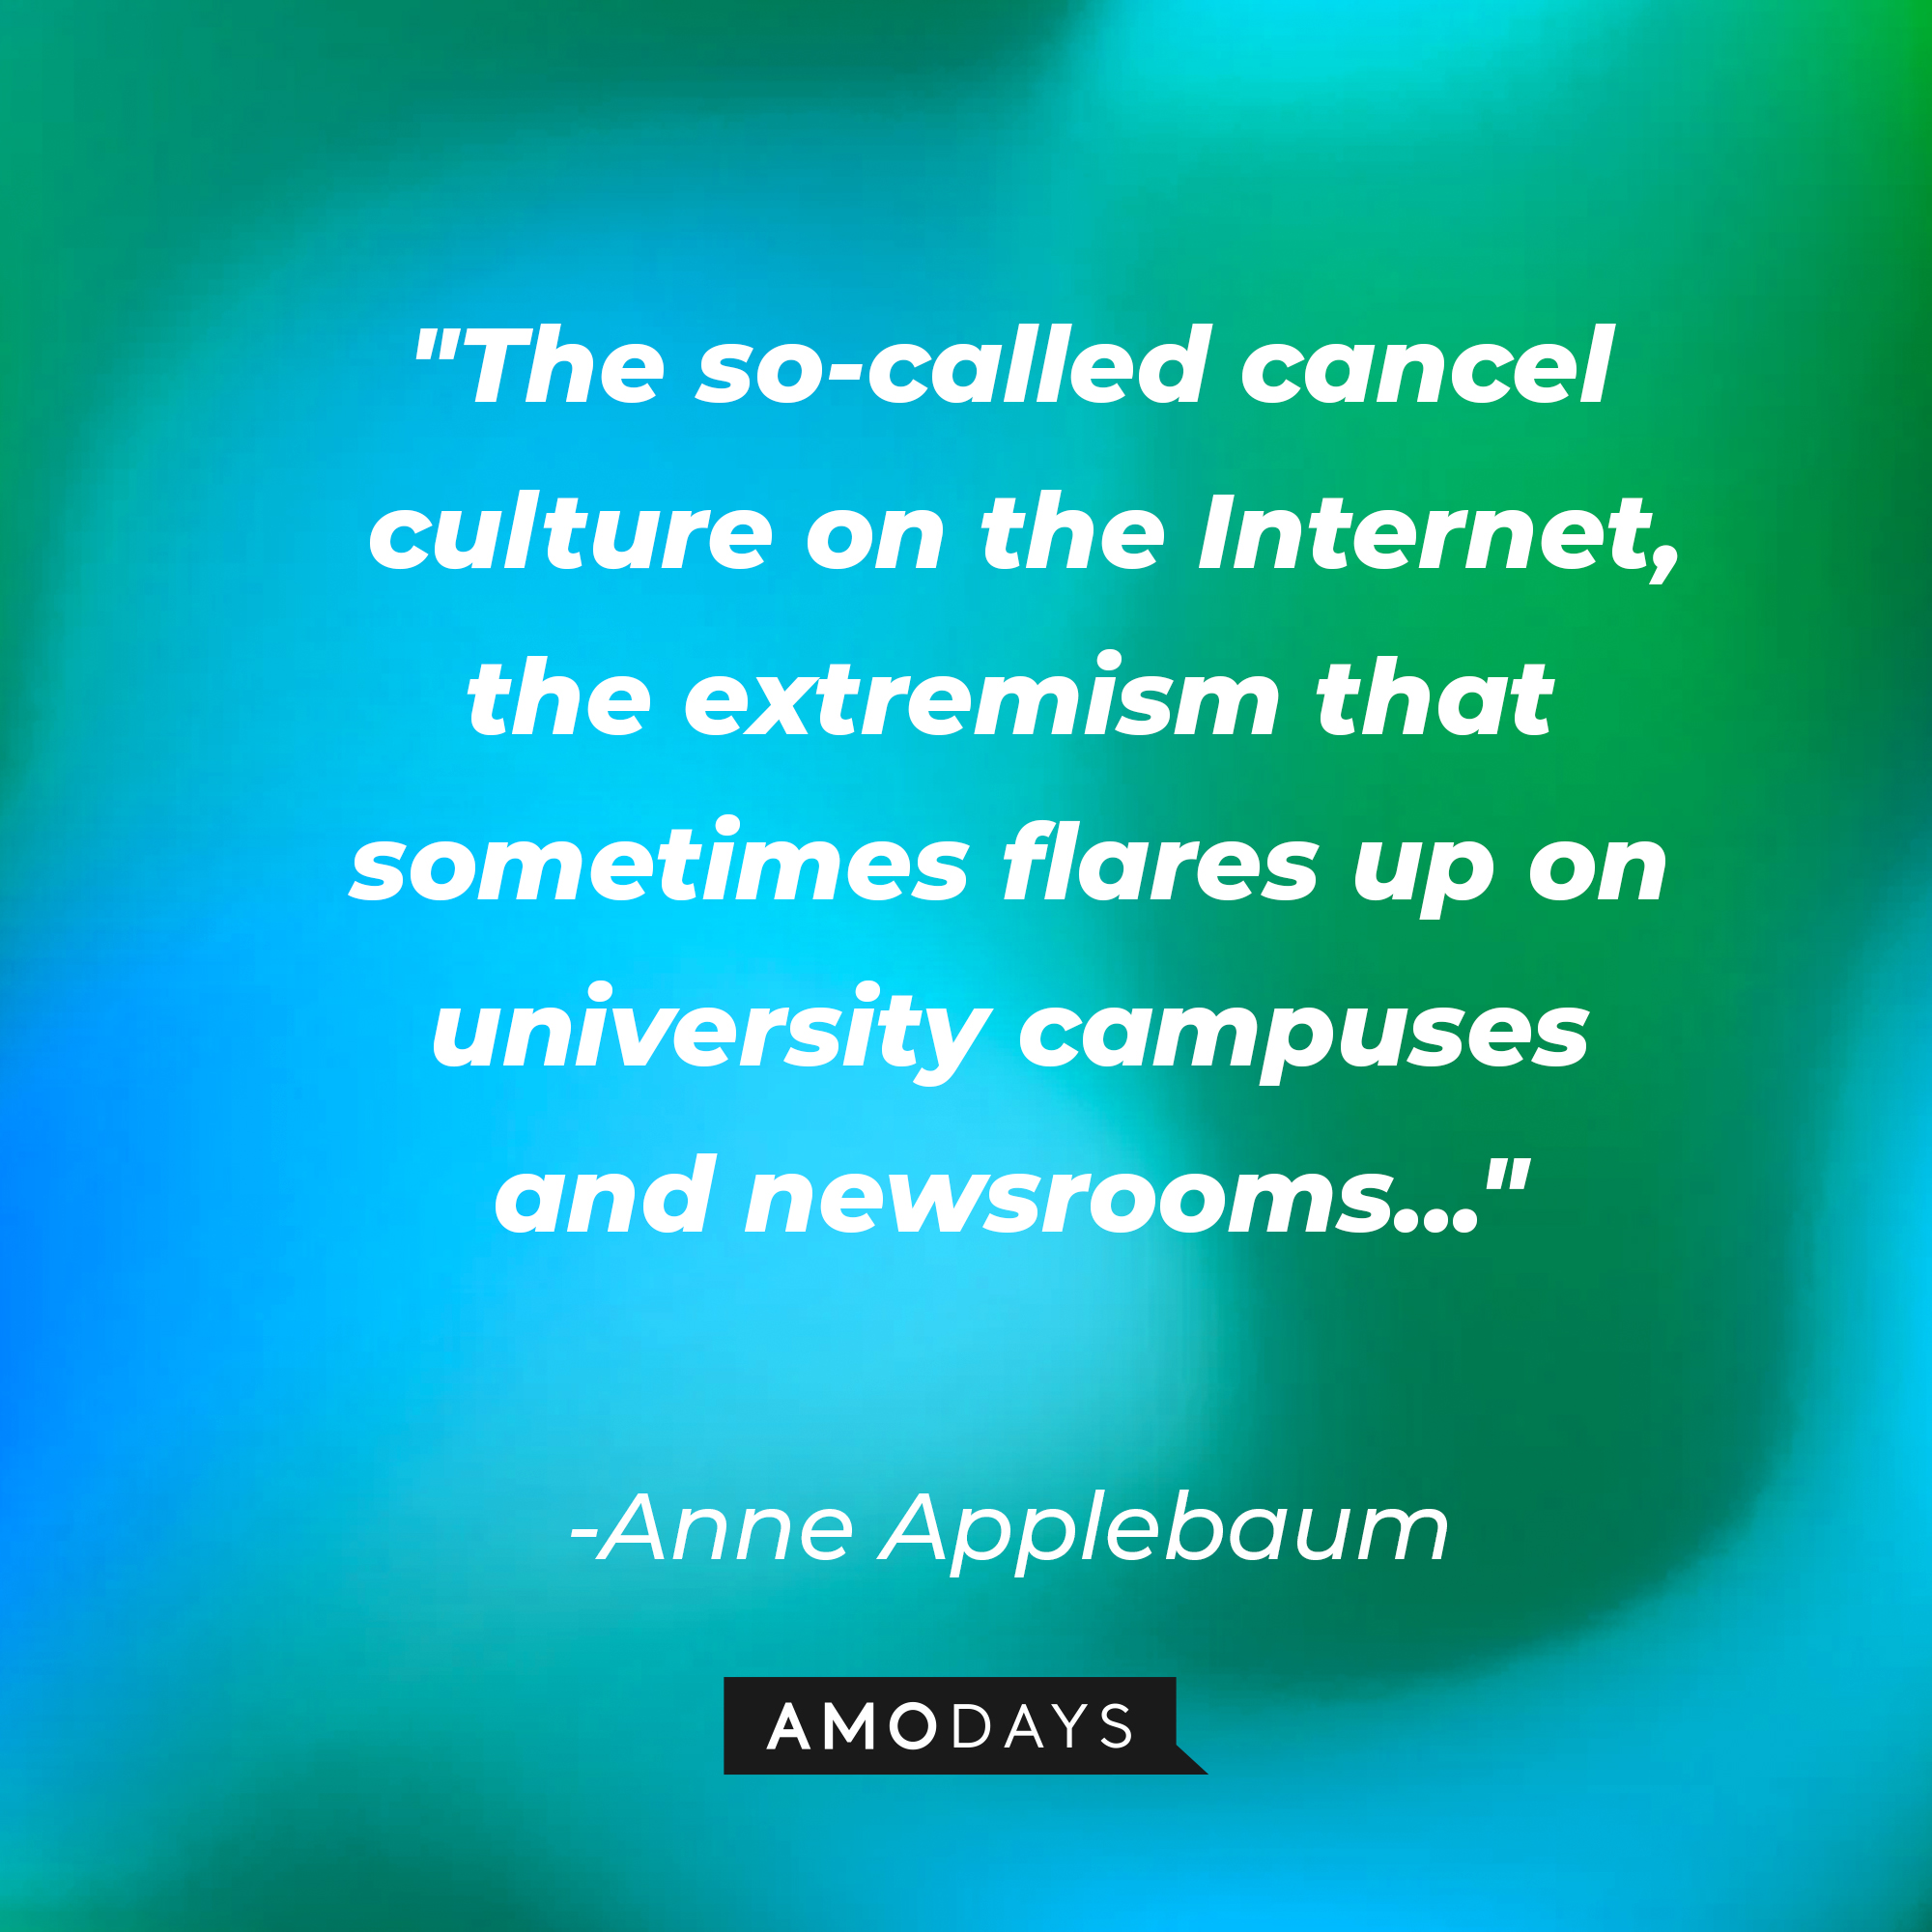 Anne Applebaum's quote: "The so-called cancel culture on the Internet, the extremism that sometimes flares up on university campuses and newsrooms..." | Source: AmoDays